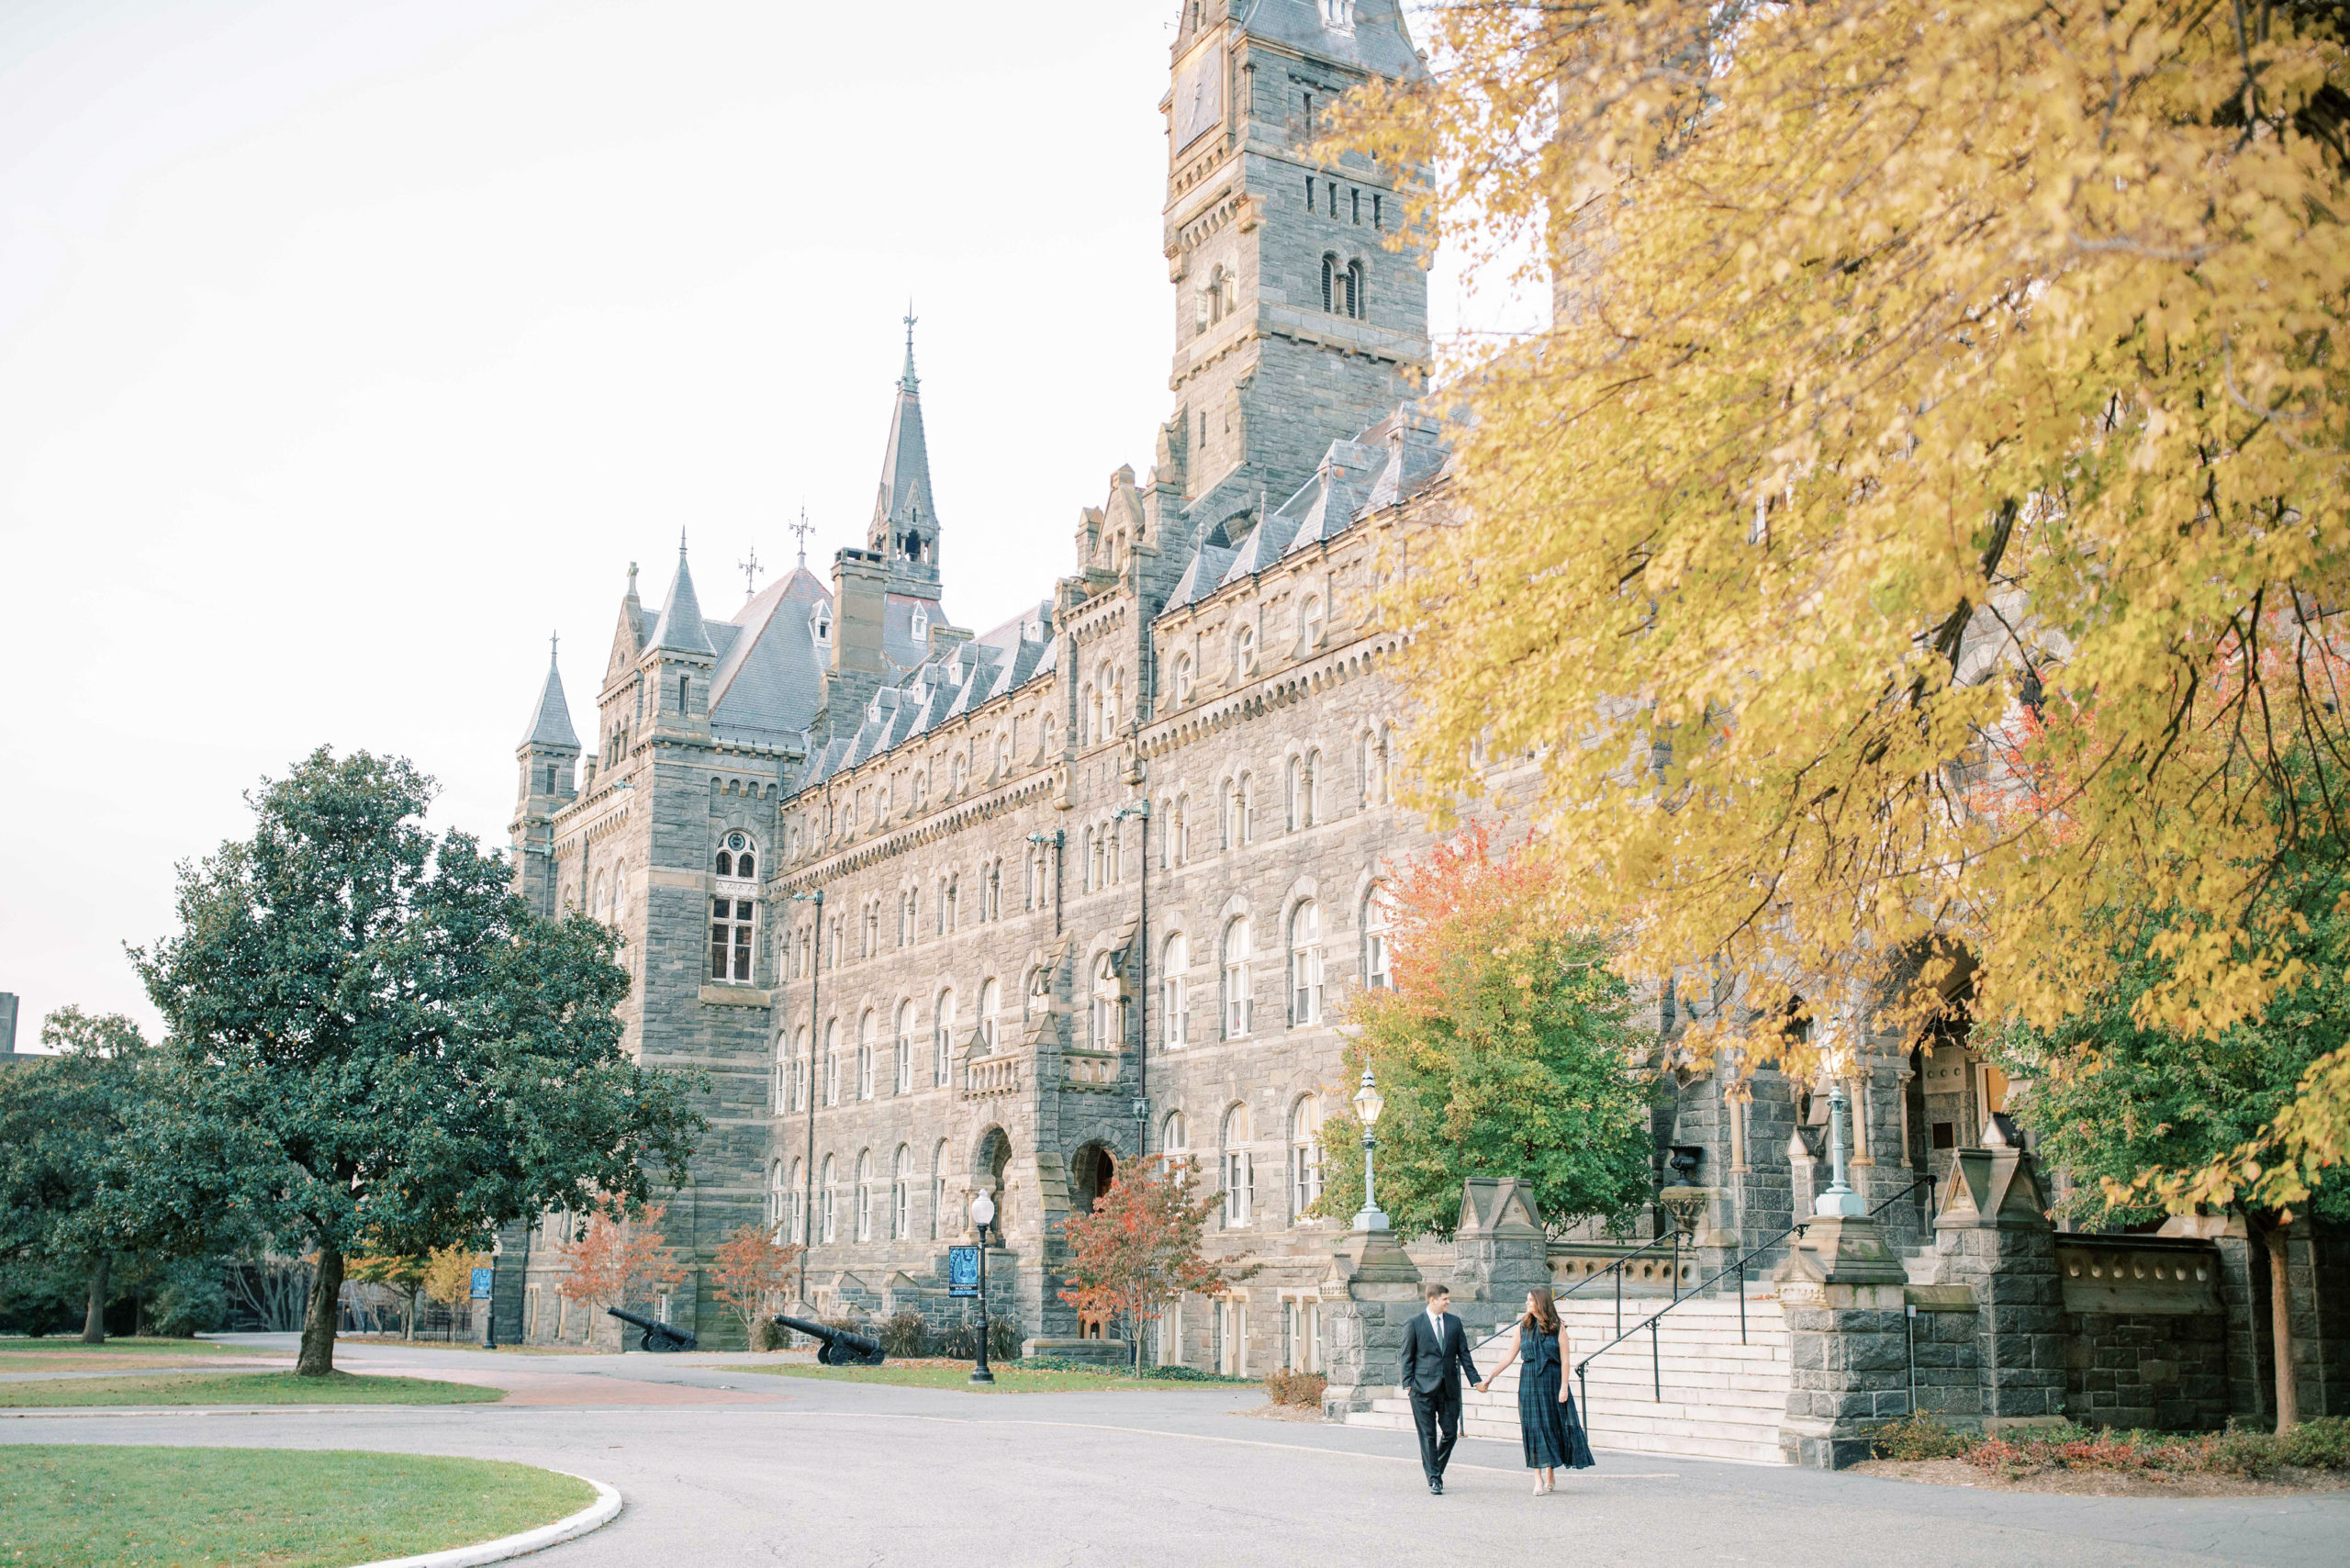 A classic Georgetown University Engagement Session in Washington, DC by wedding photographer Alicia Lacey.